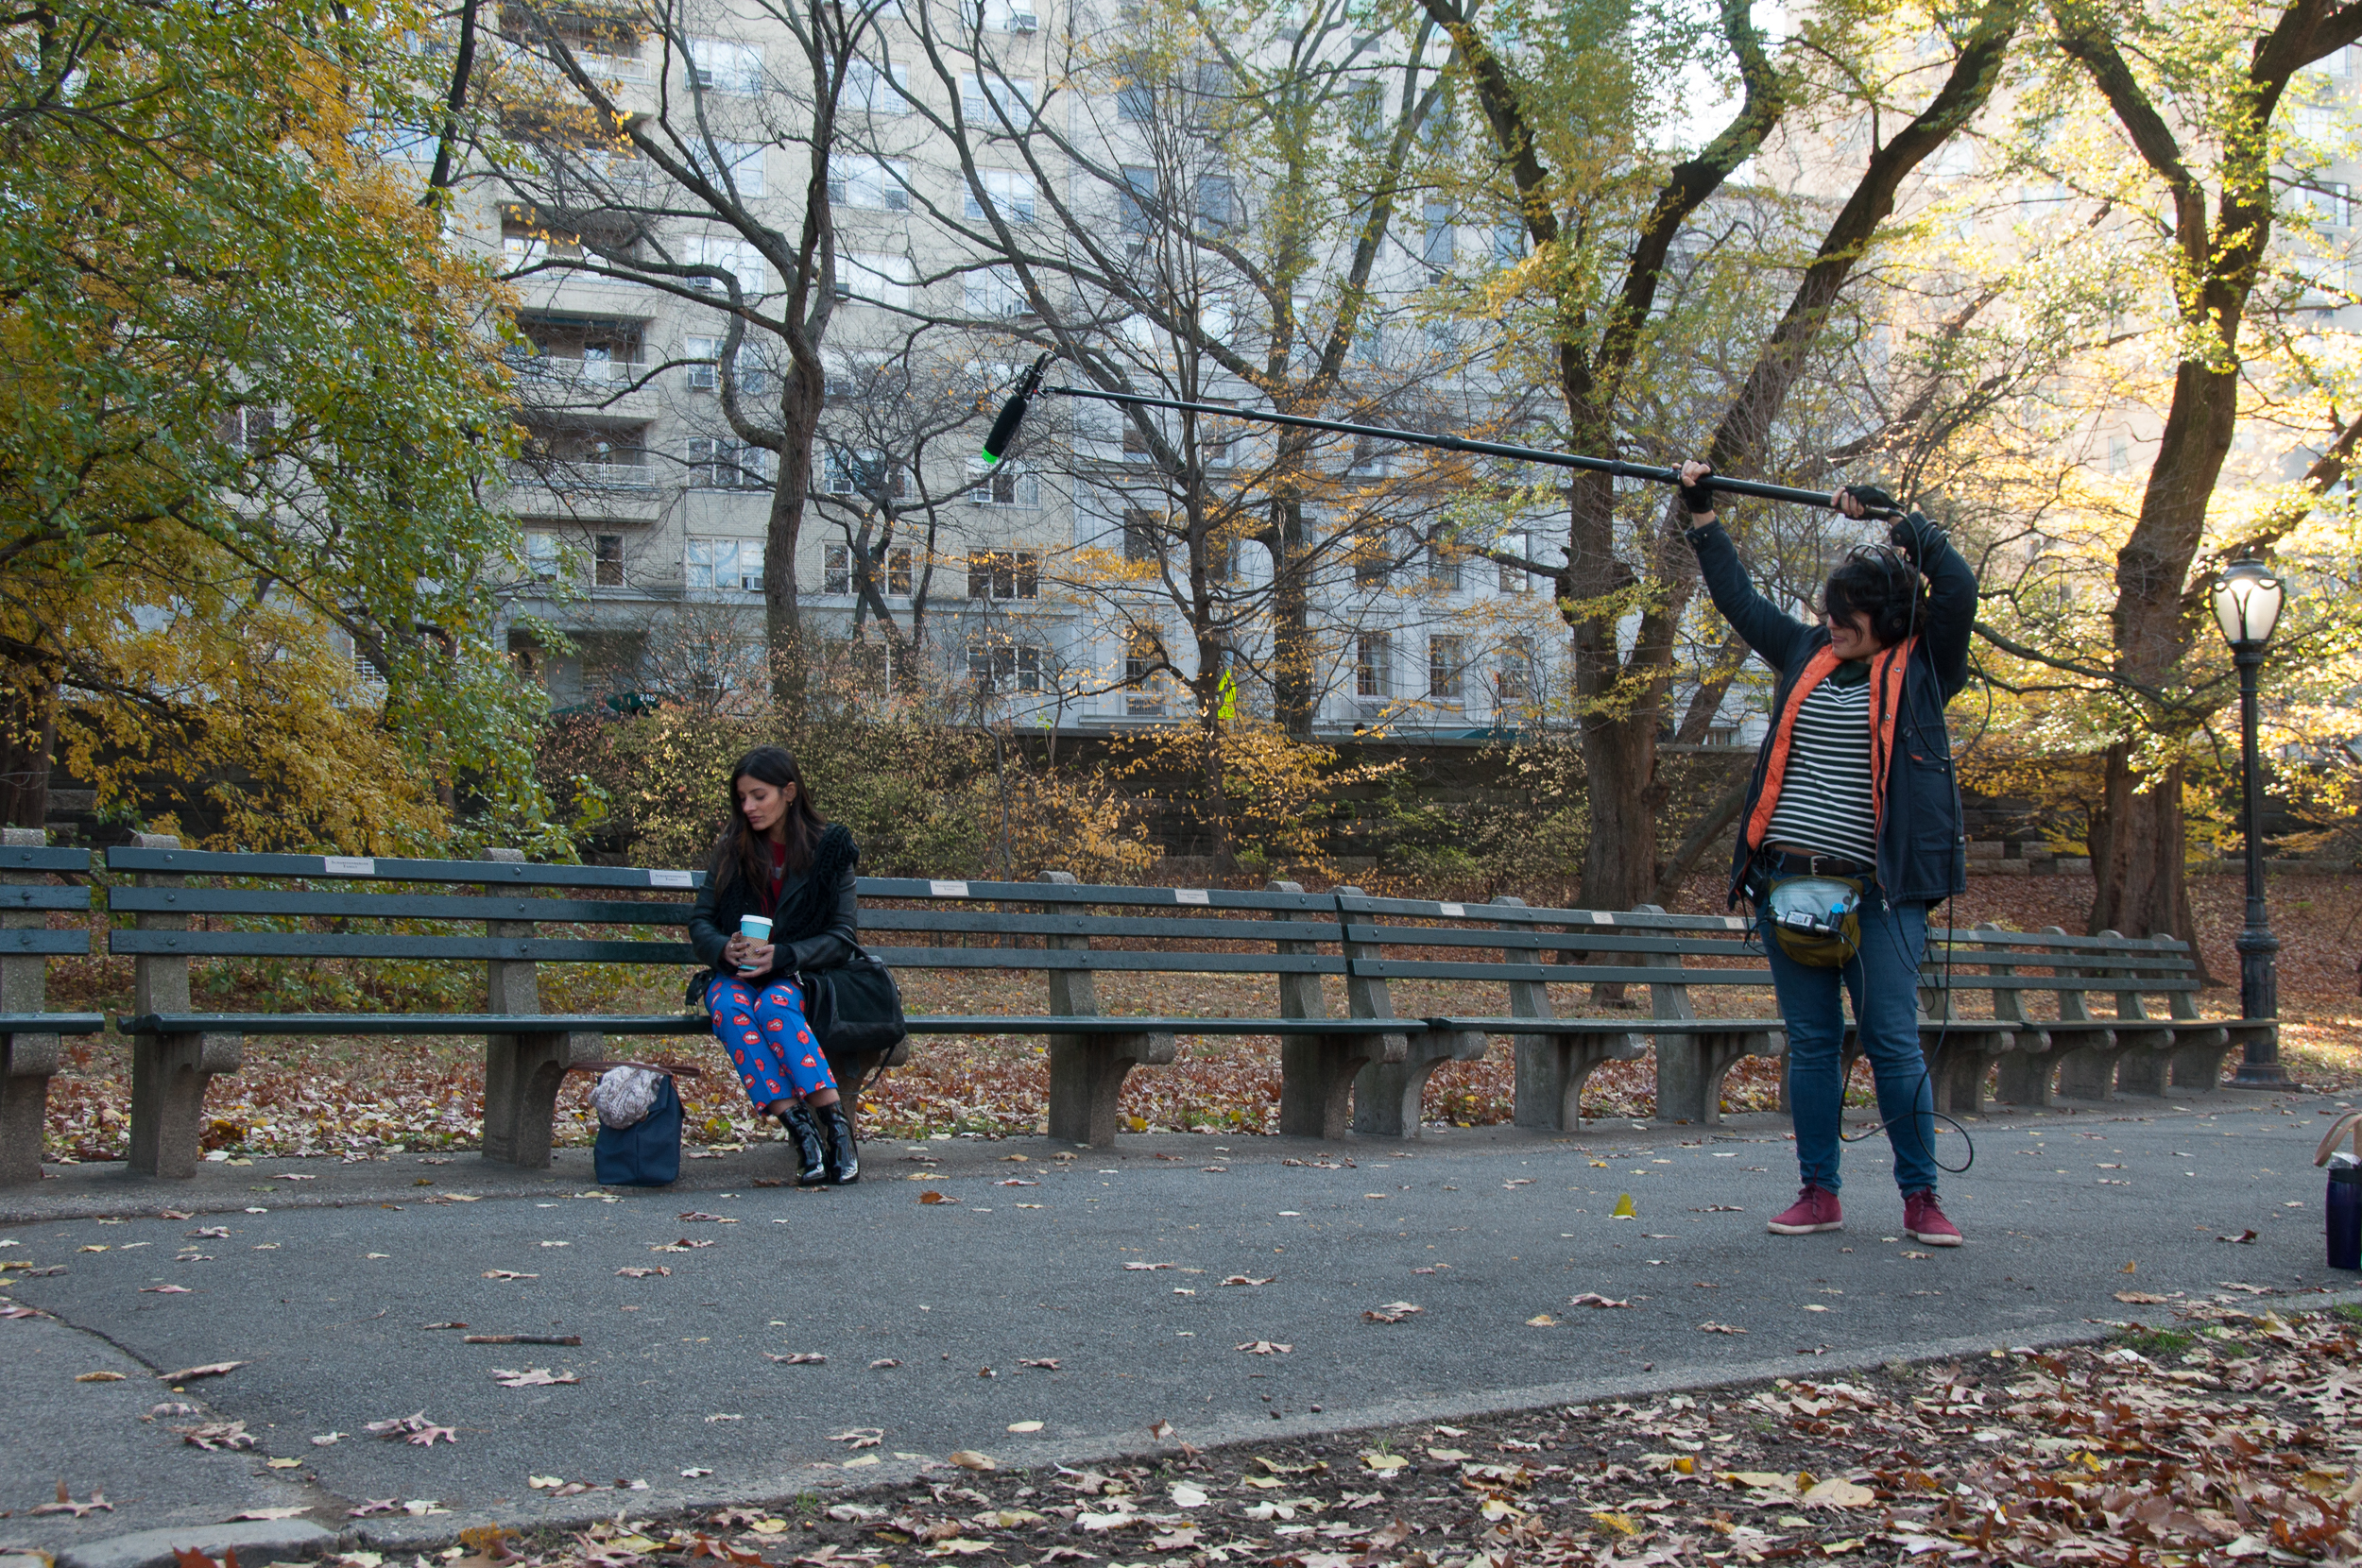 Sound designer holds boom microphone over actress who sits on a bench in a park